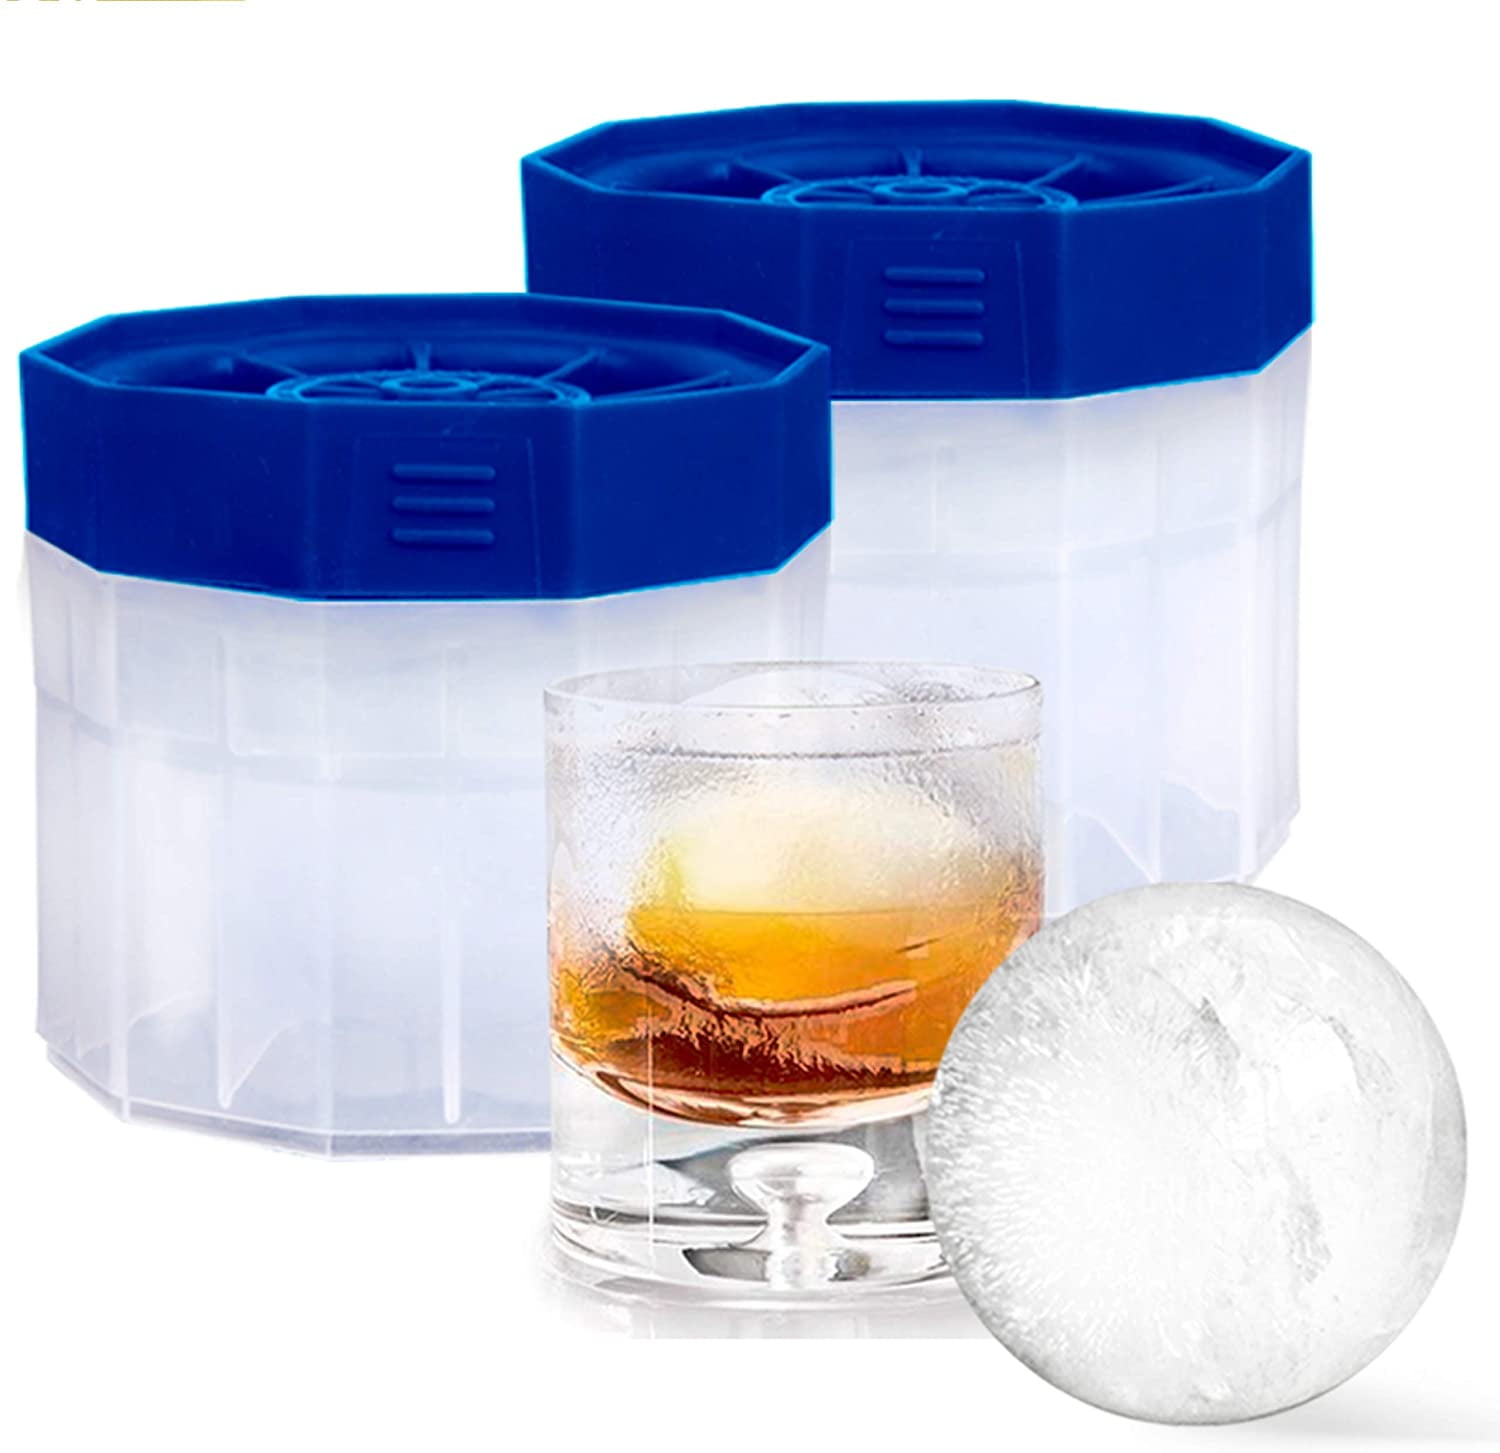 Sharper Image Ice Molds Cube and Sphere 2-Piece Ice Cube Mold